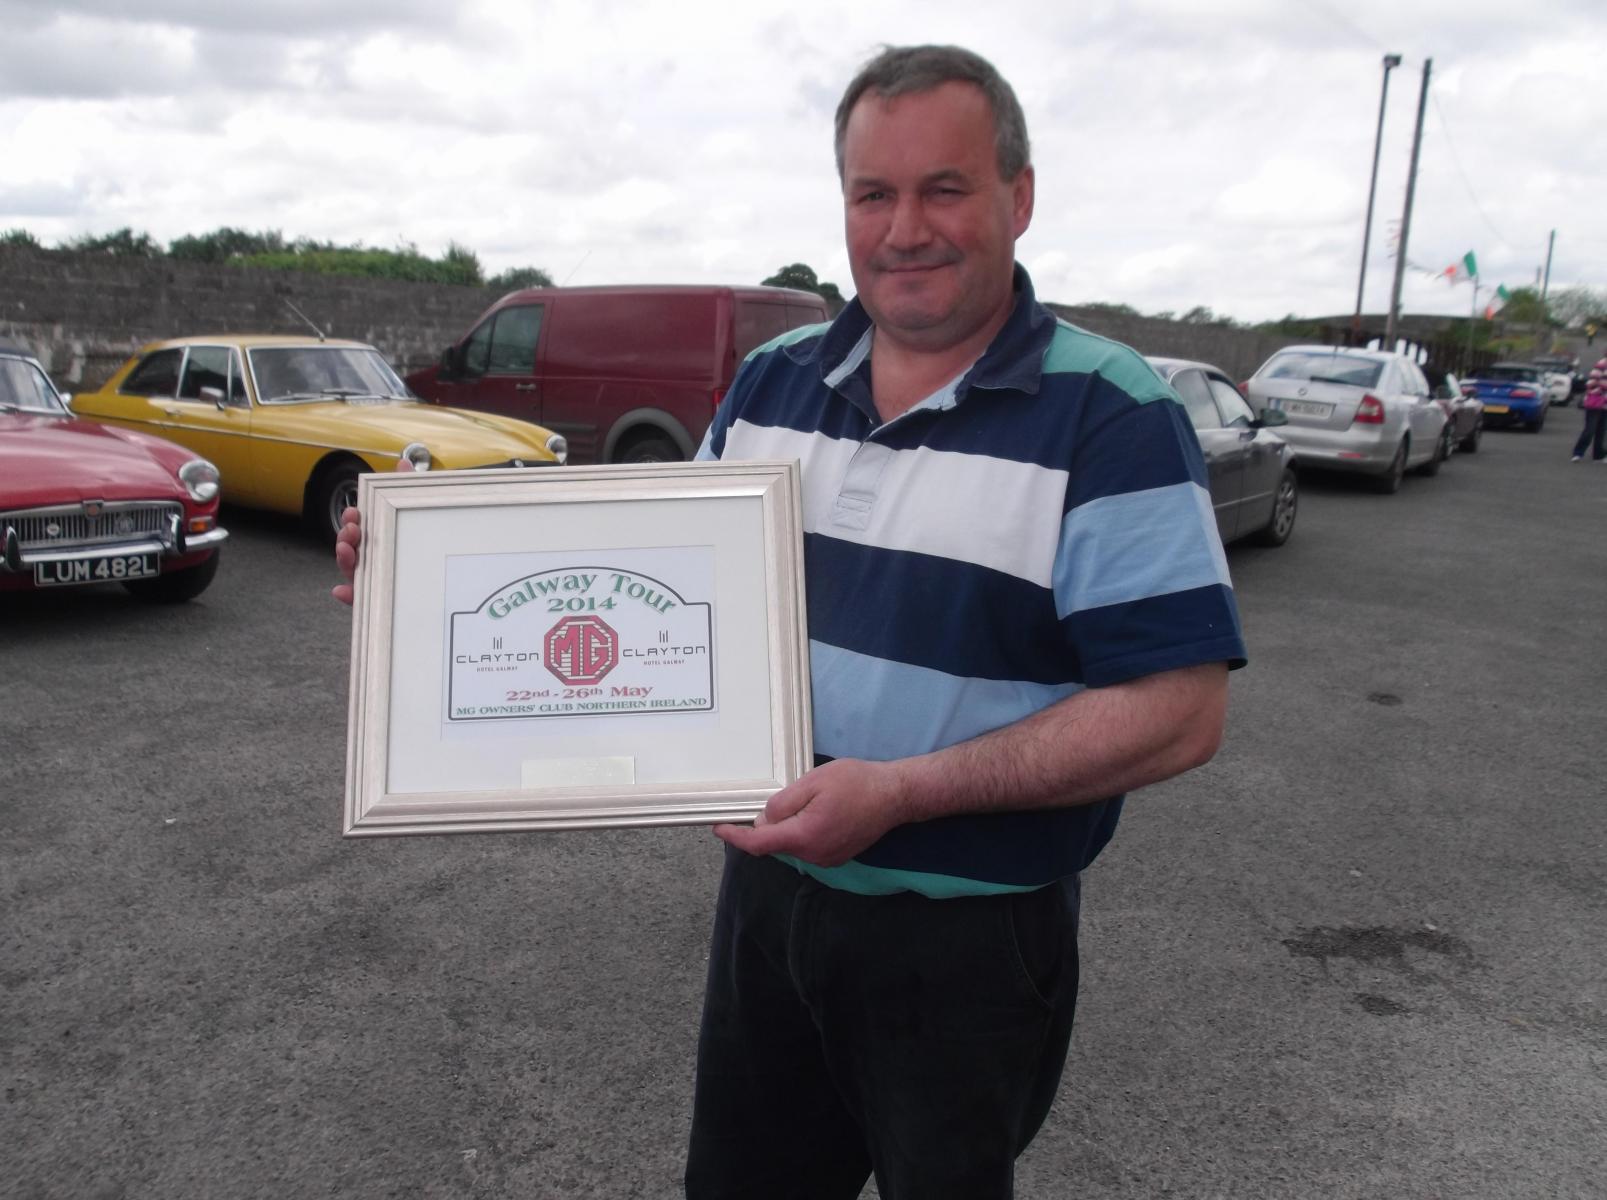 John-Moran-accepting-the-plaque-which-was-presented-to-him-at-the-Galway-weekend-sc.